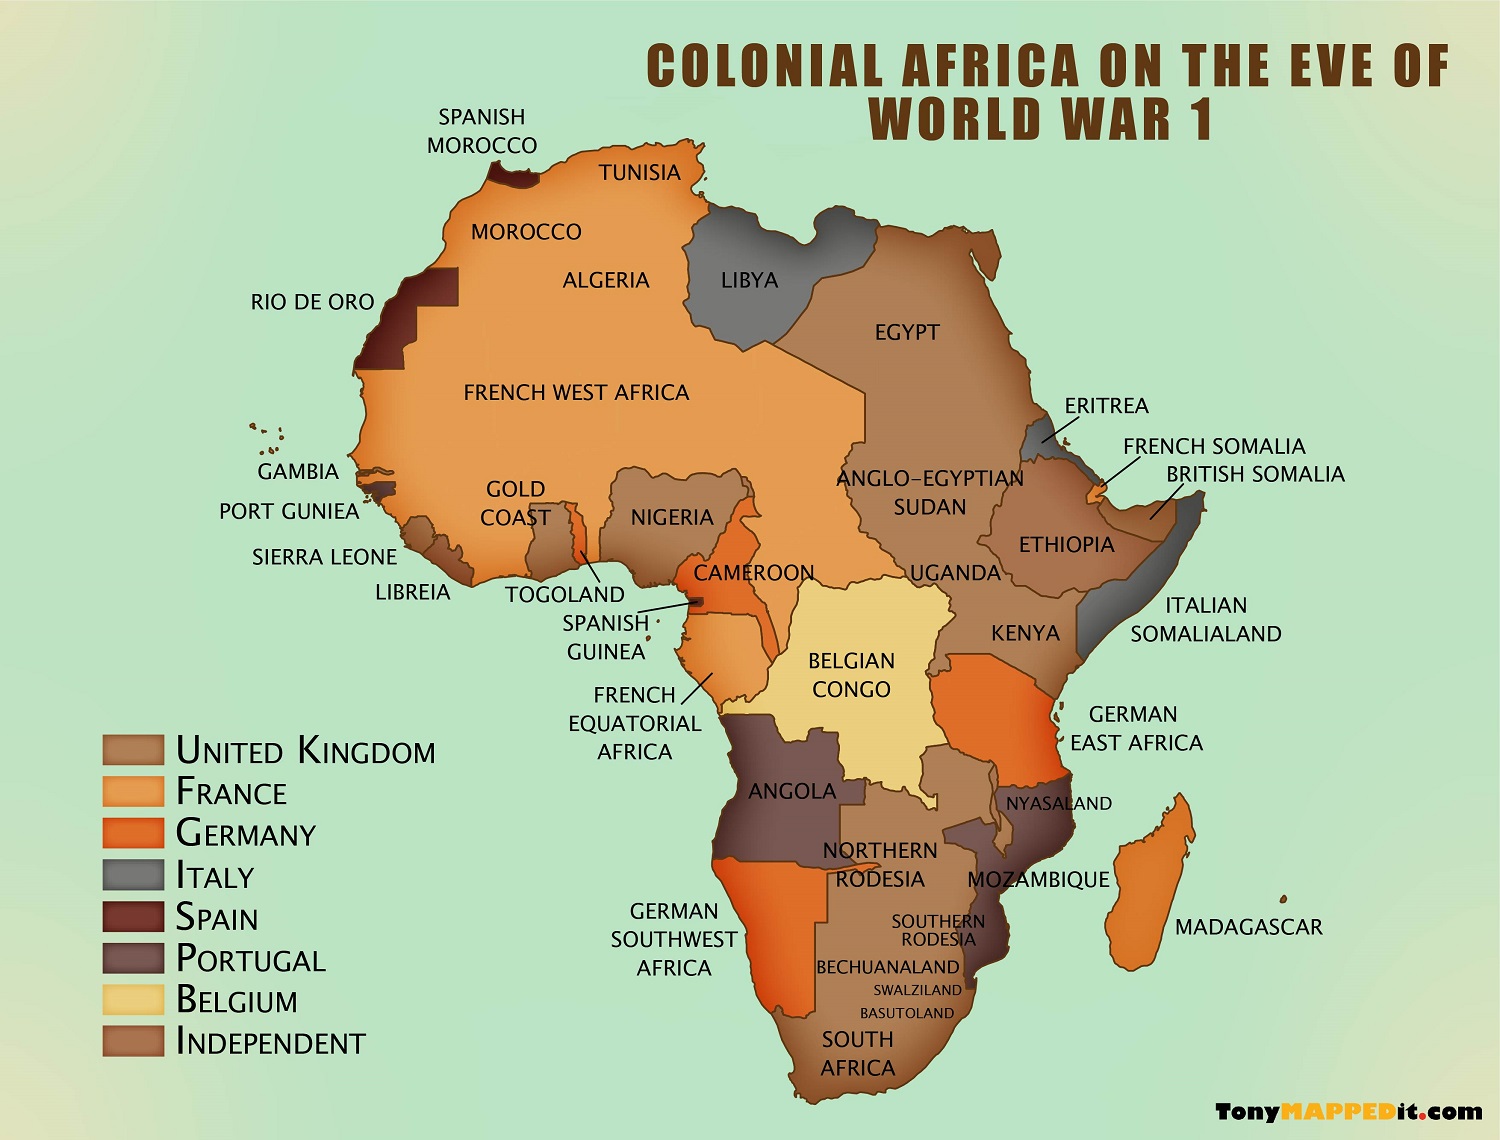 Map Of Colonized Africa In 1914 - Tony Mapped It